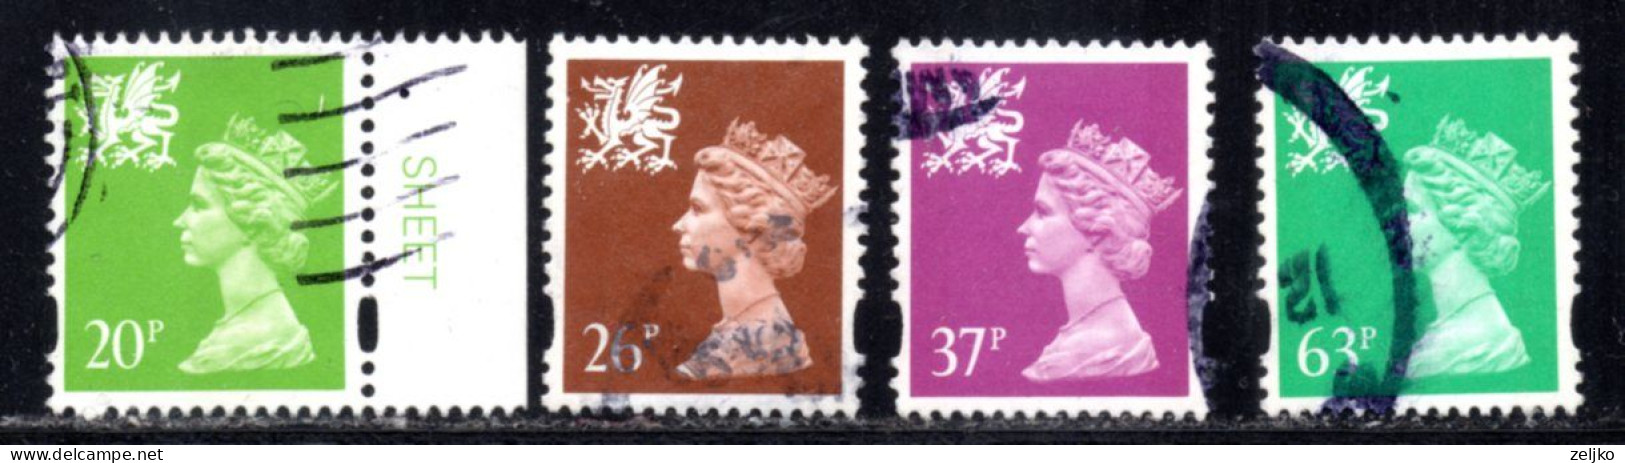 UK, GB, Great Britain, Wales, Used, 1996, Michel 66 - 71 - Wales